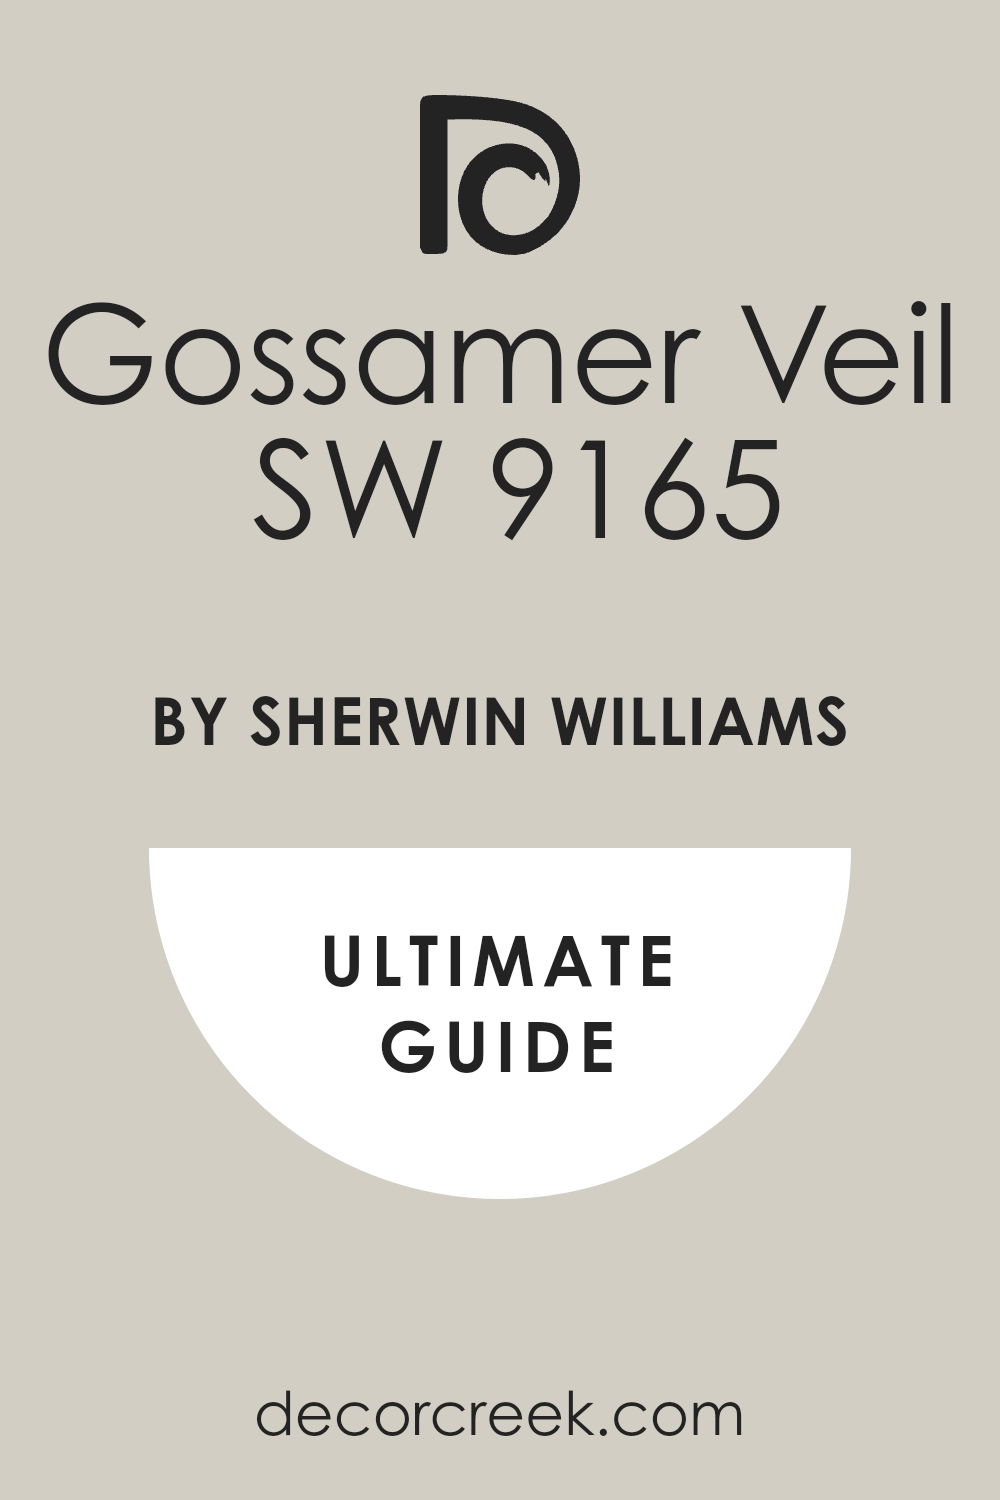 gossamer_veil_sw_9165_paint_color_by_sherwin_williams_ultimate_guide